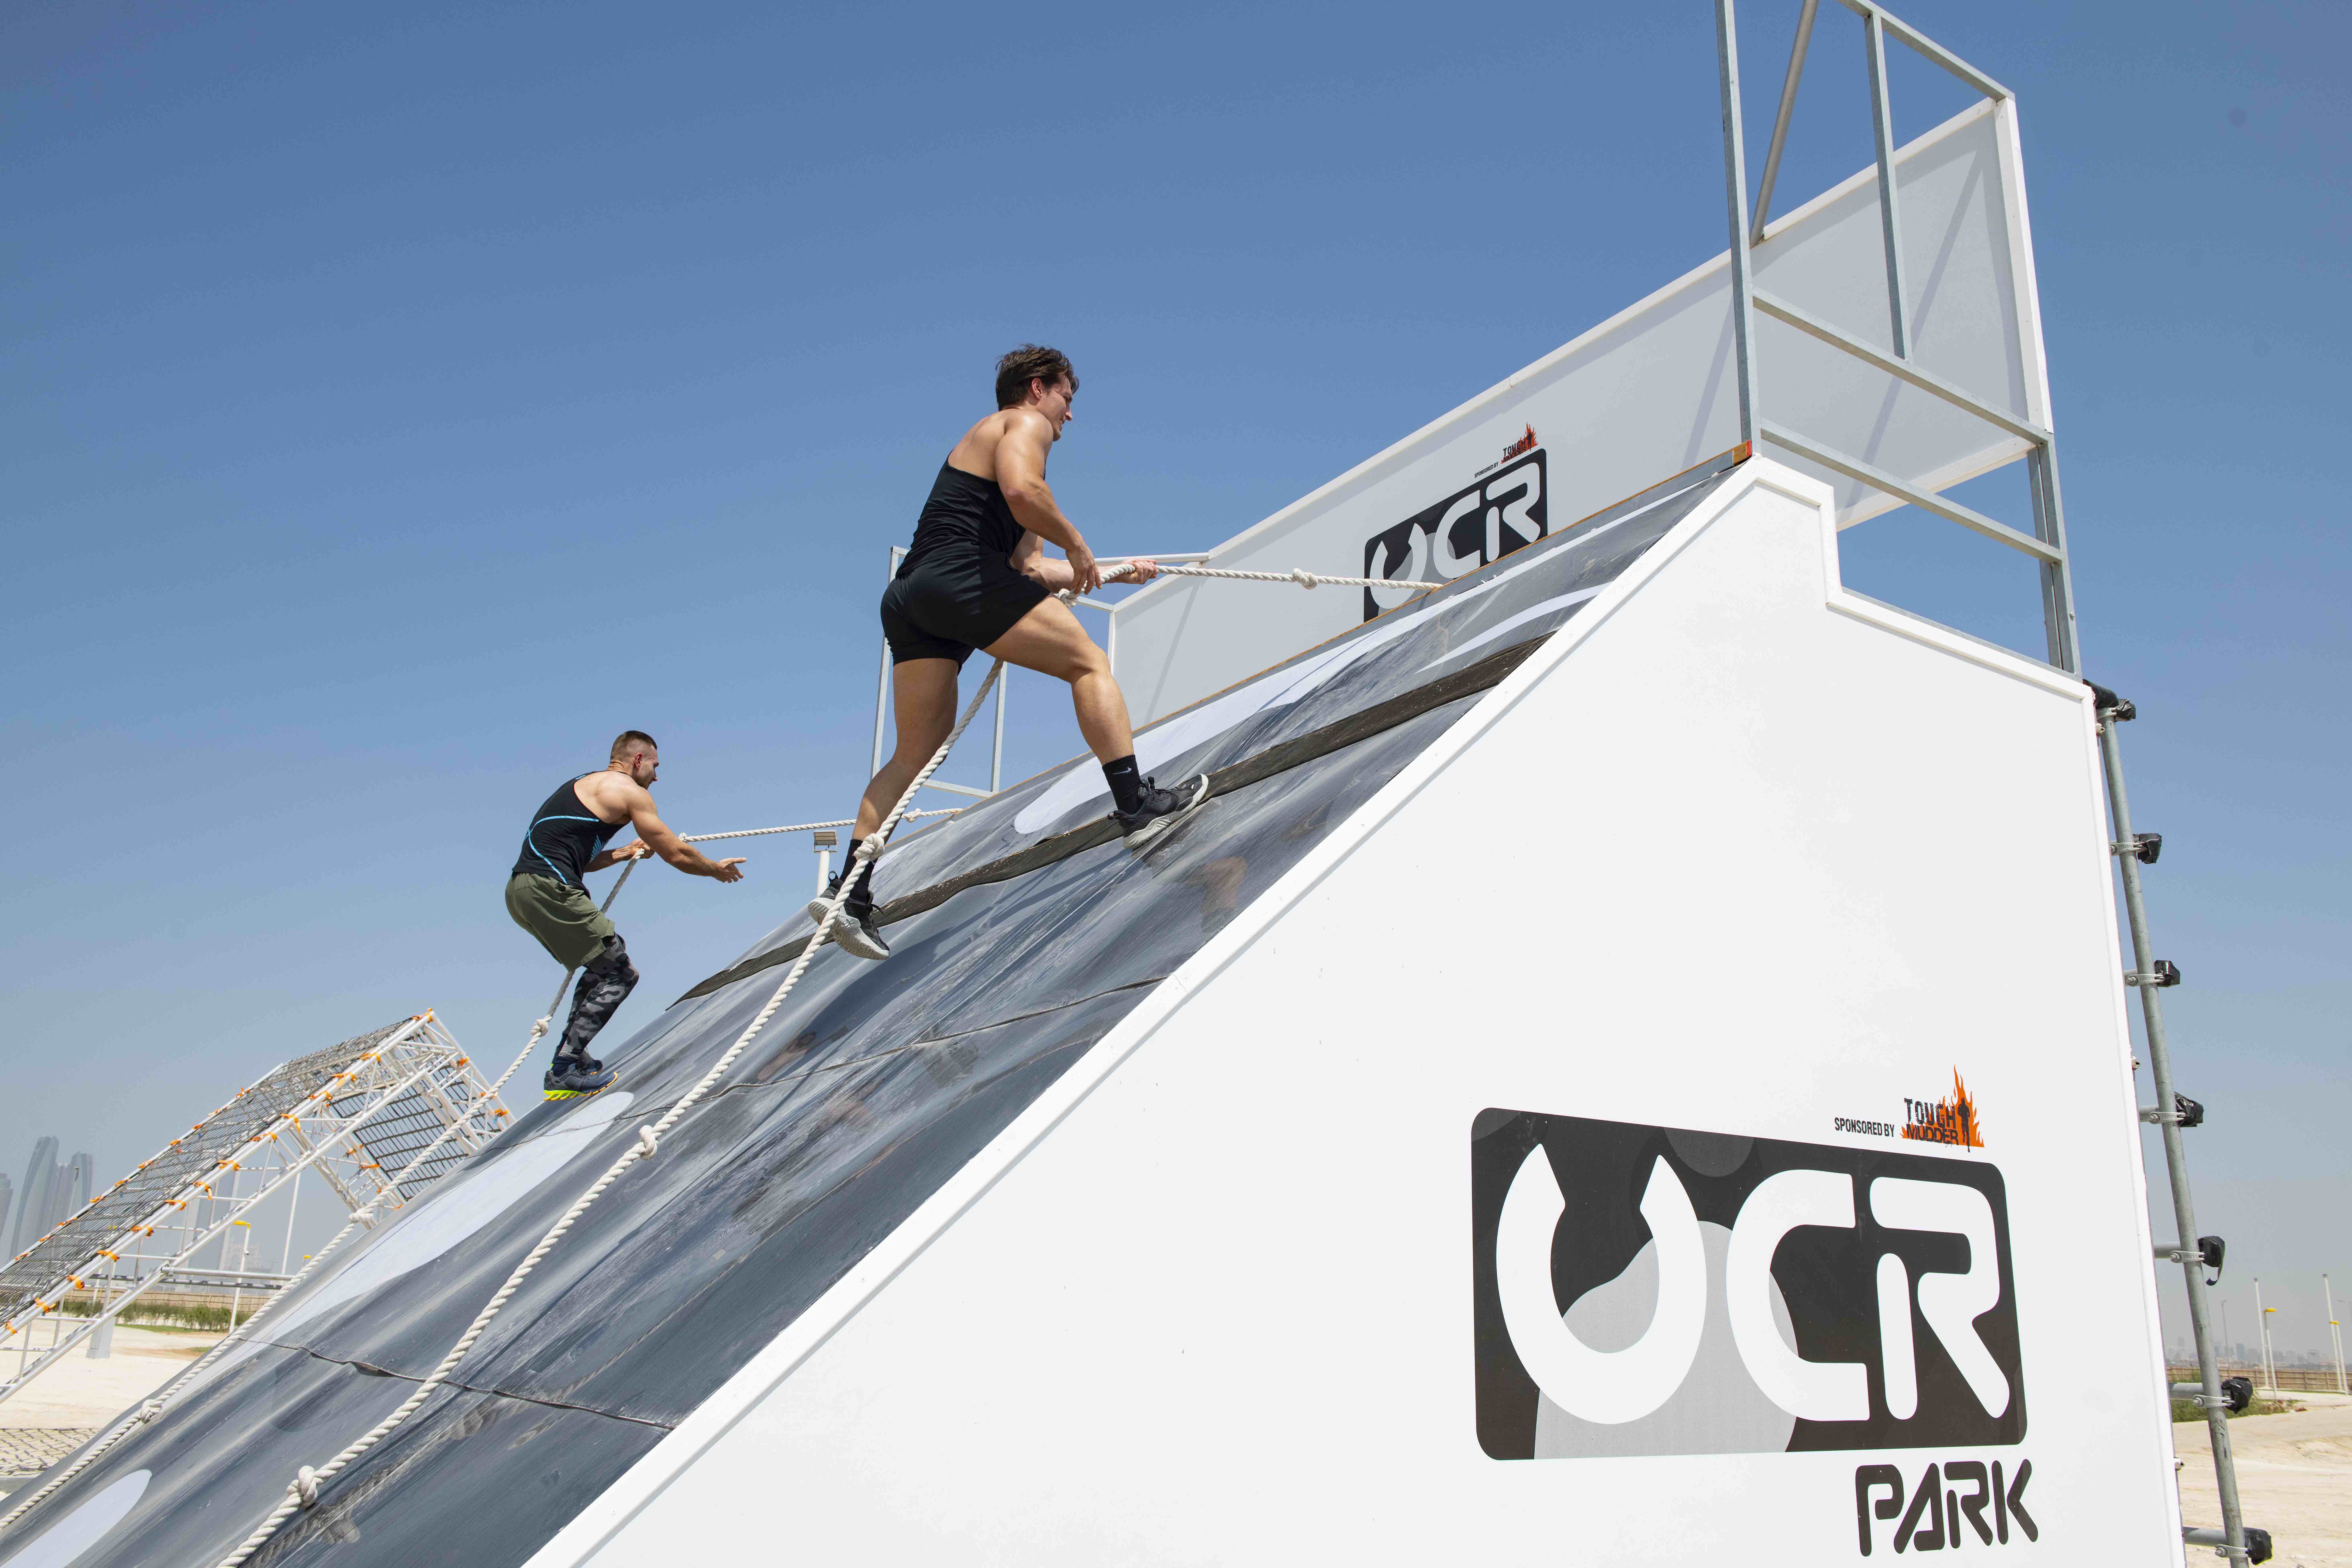 The UAE’s Largest Permanent Obstacle Course Site, OCR Park is now open in Abu Dhabi!